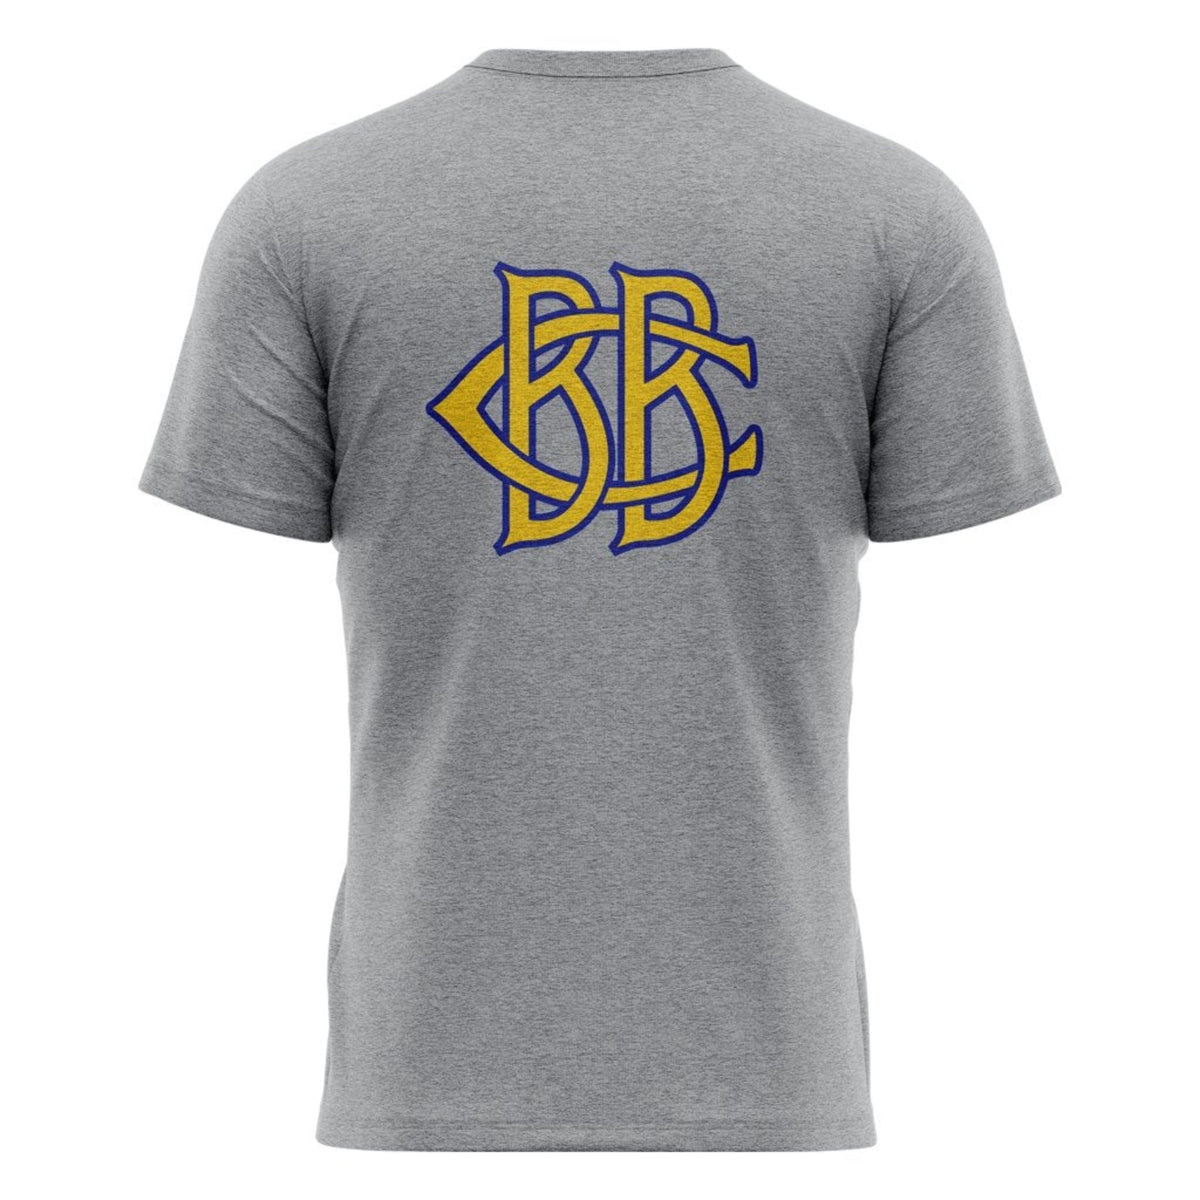 Balmy Beach &quot;BBC&quot; Tee - Youth Sizing XS-XL - Athletic Grey